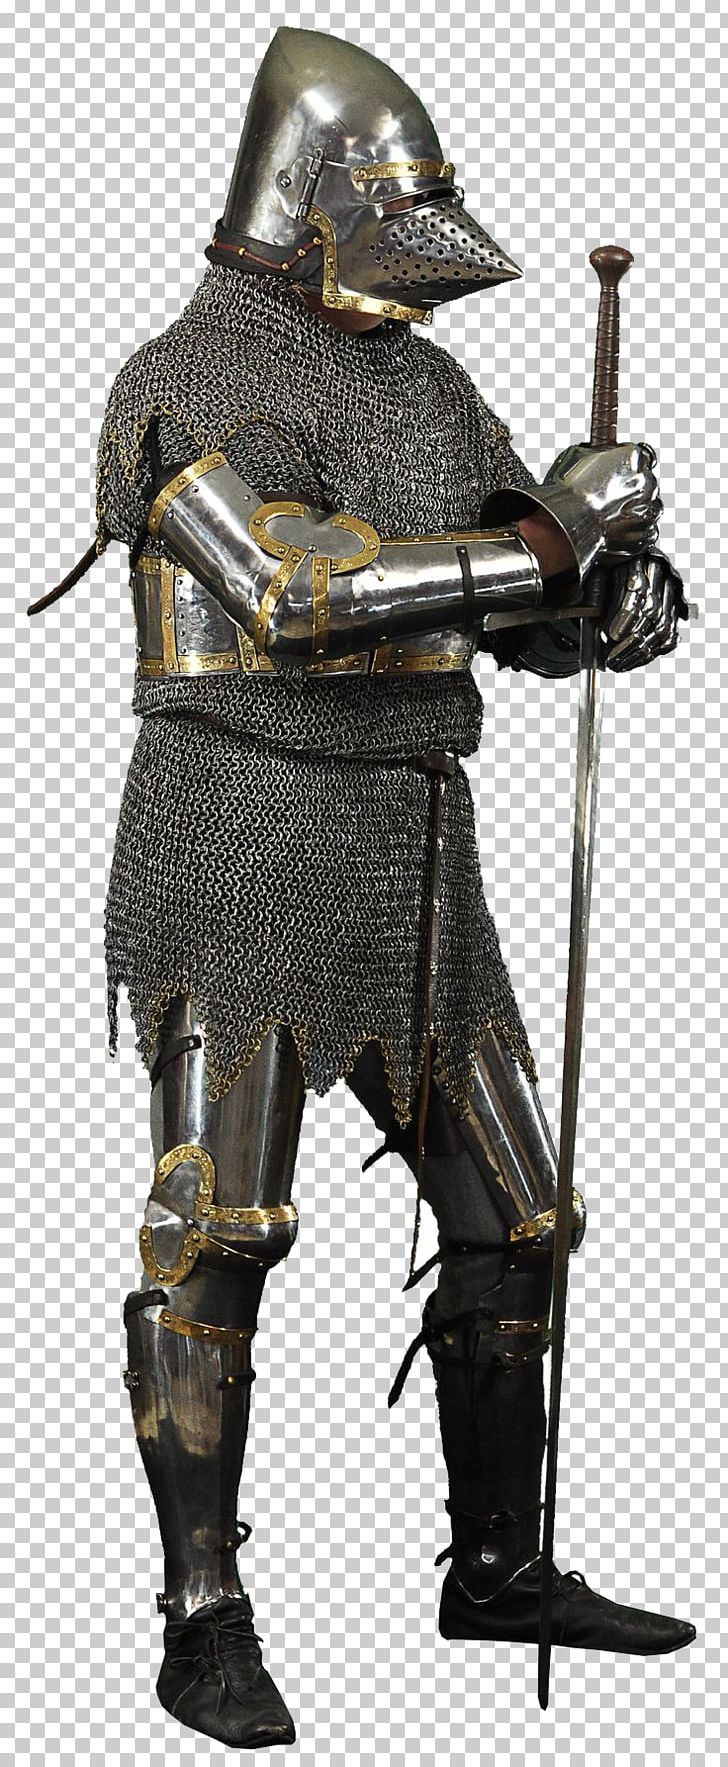 Middle Ages Knight Components Of Medieval Armour PNG, Clipart, Armour, Bronze, Bronze Sculpture, Chivalry, Components Of Medieval Armour Free PNG Download